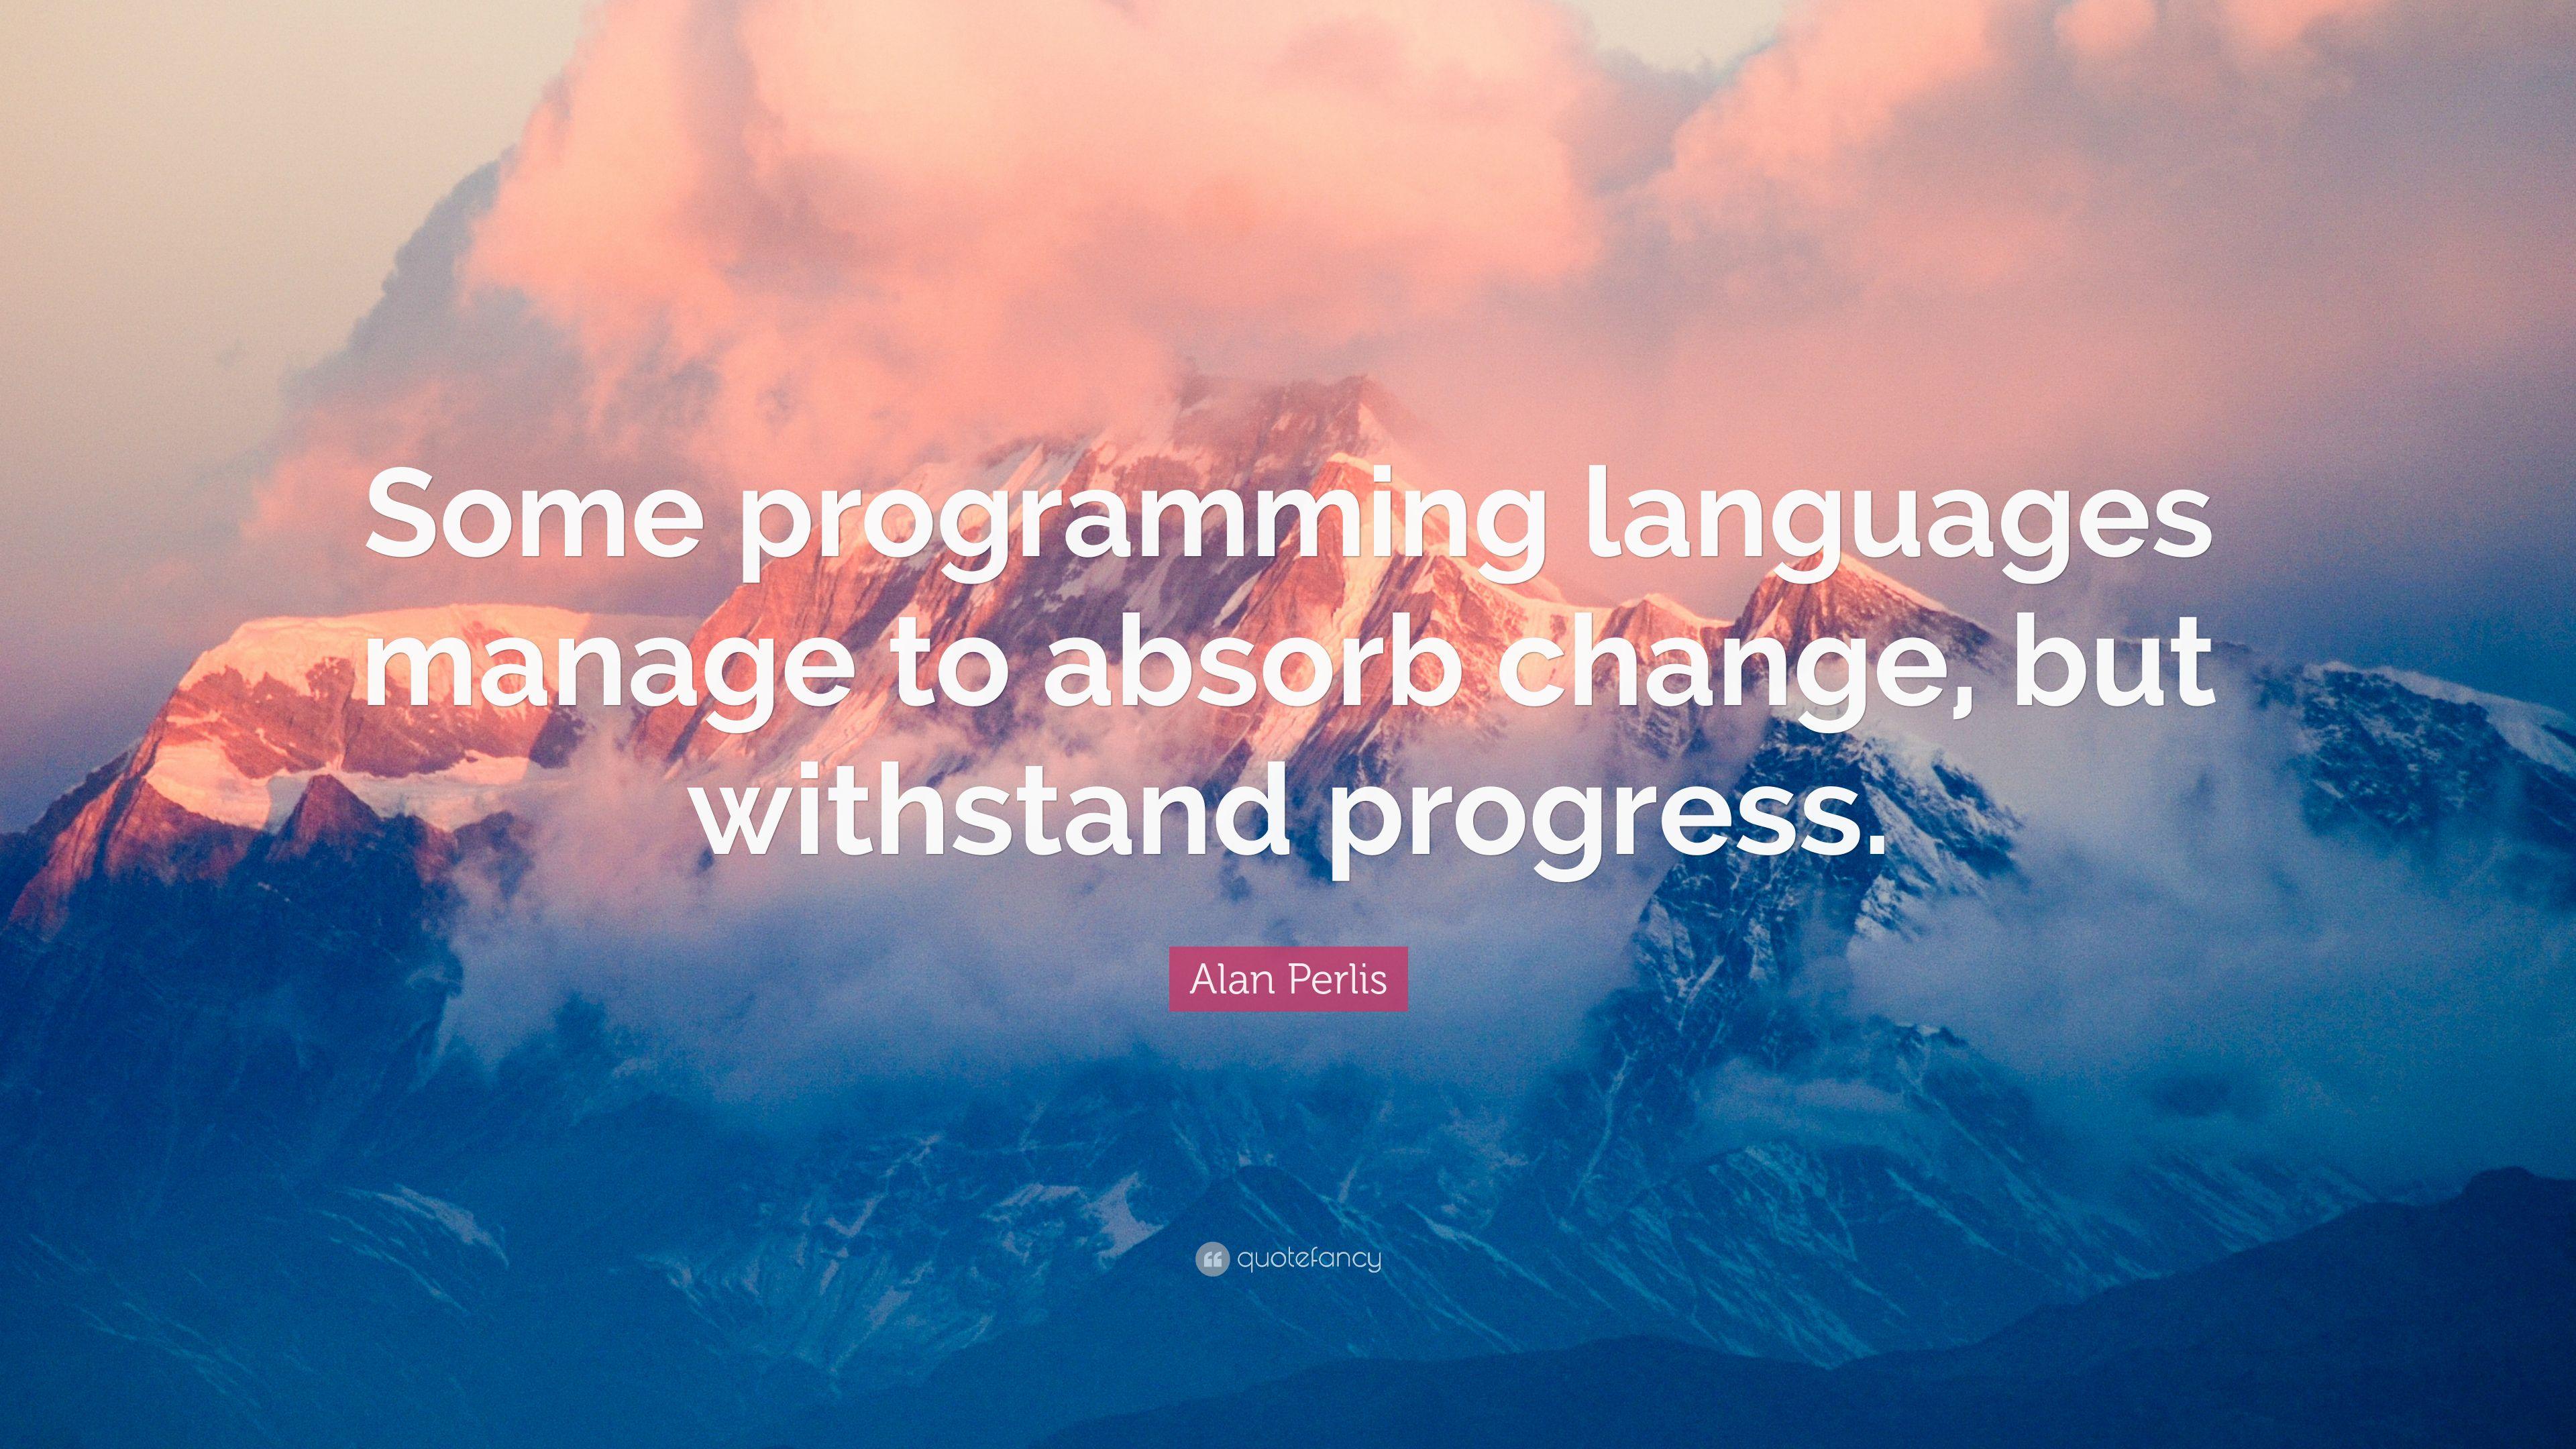 Alan Perlis Quote: “Some programming languages manage to absorb